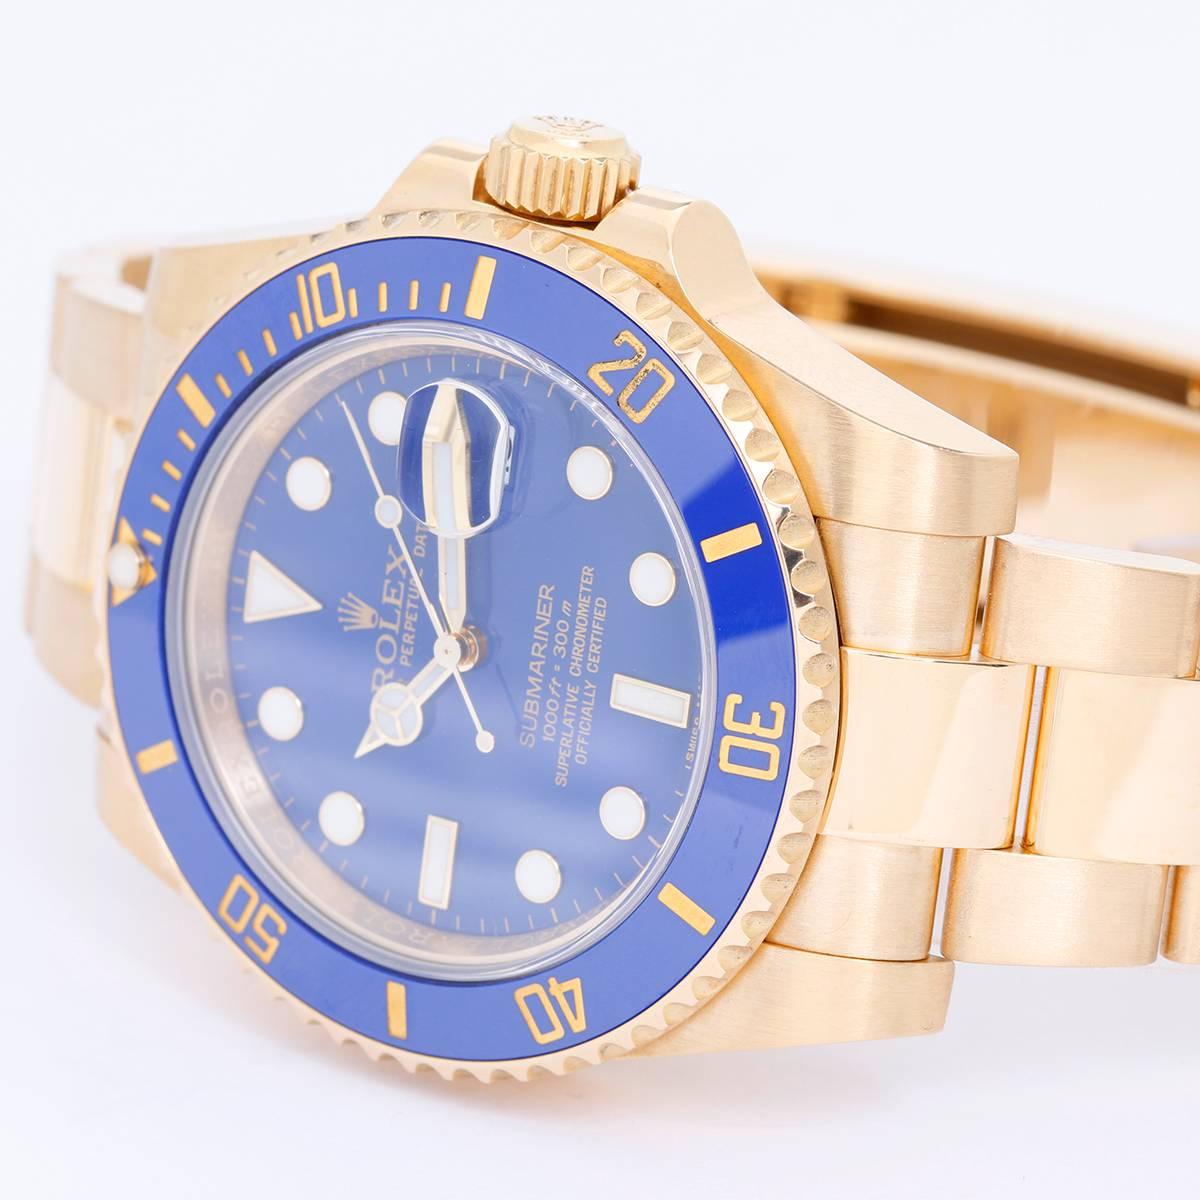 Rolex Submariner 18k Gold Men's Watch 116618 Blue Dial -  winding, 31 jewels, Quickset, sapphire crystal. 18k yellow gold case with rotating bezel with blue insert (40mm diameter). Blue dial with white hour markers. 18k yellow gold Oyster bracelet